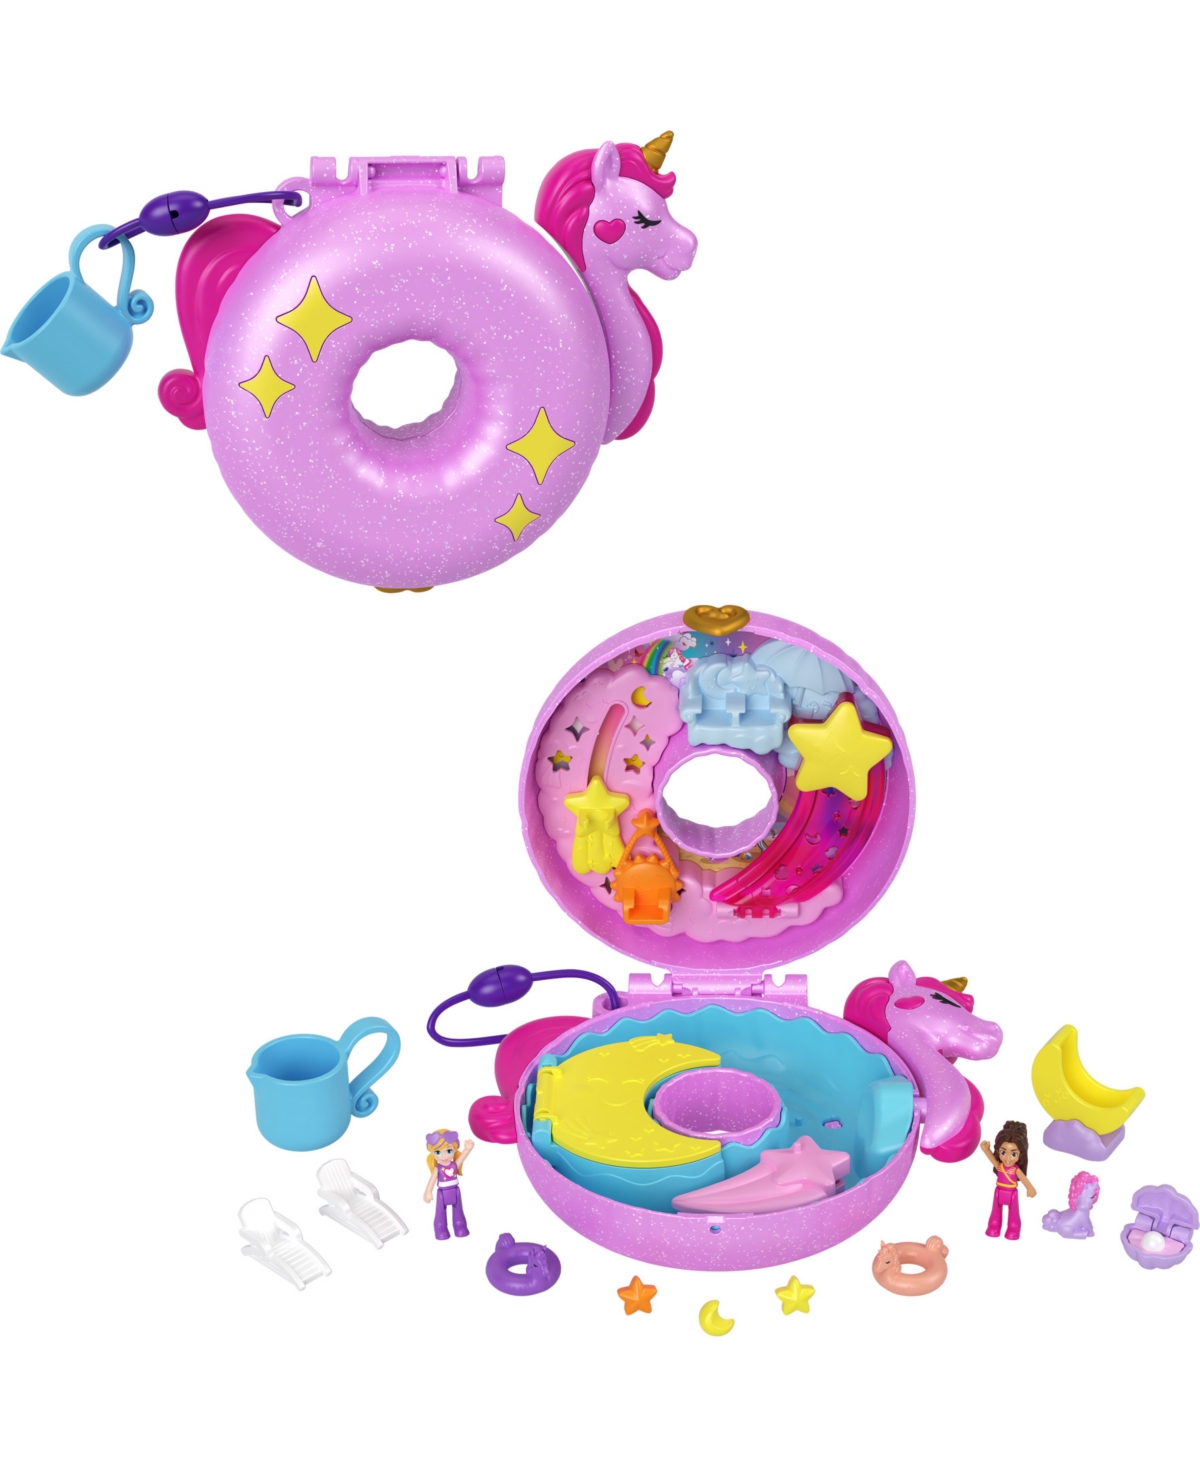 Polly Pocket Kids' Dolls And Playset, Unicorn Toys, Sparkle Cove Adventure Unicorn Floatie Compact In No Color